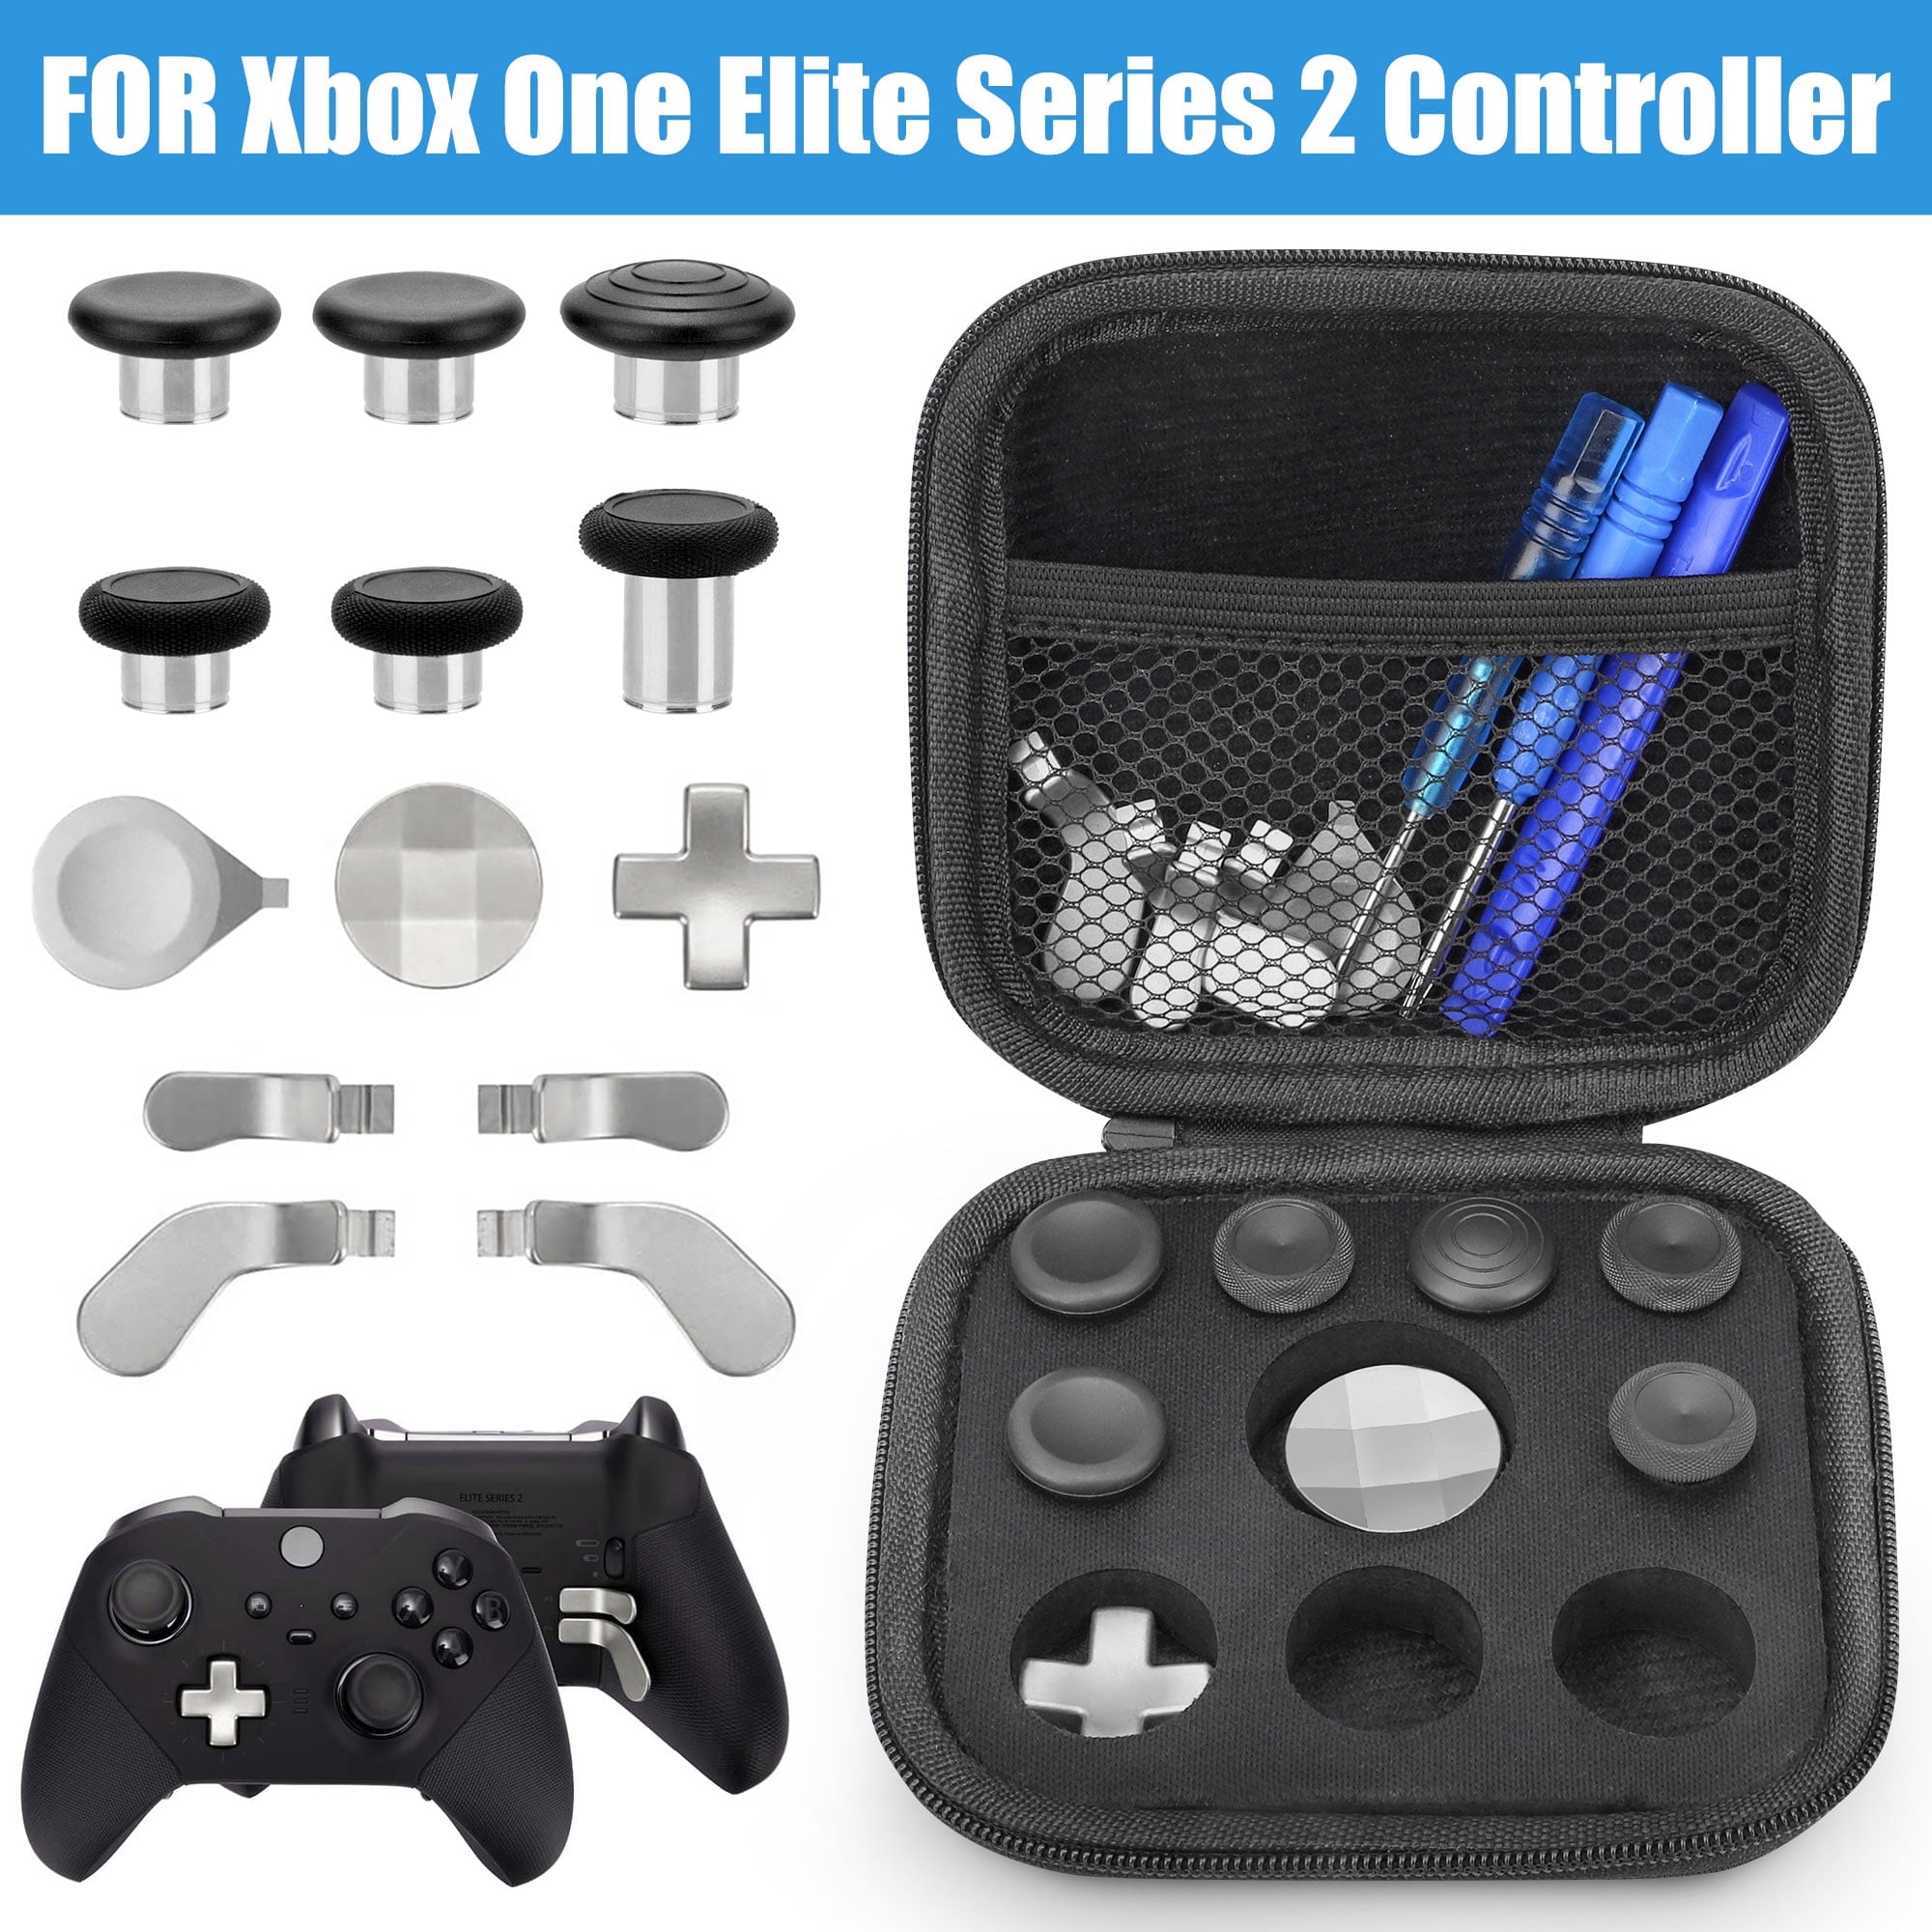 HFDR 17-in-1 Replacement Parts Fit for Xbox One Elite Series 2 Controller  With a Carry Case, 6 Metal Thumbsticks, 4 Paddles, D-Pads, Adjustment  Tools